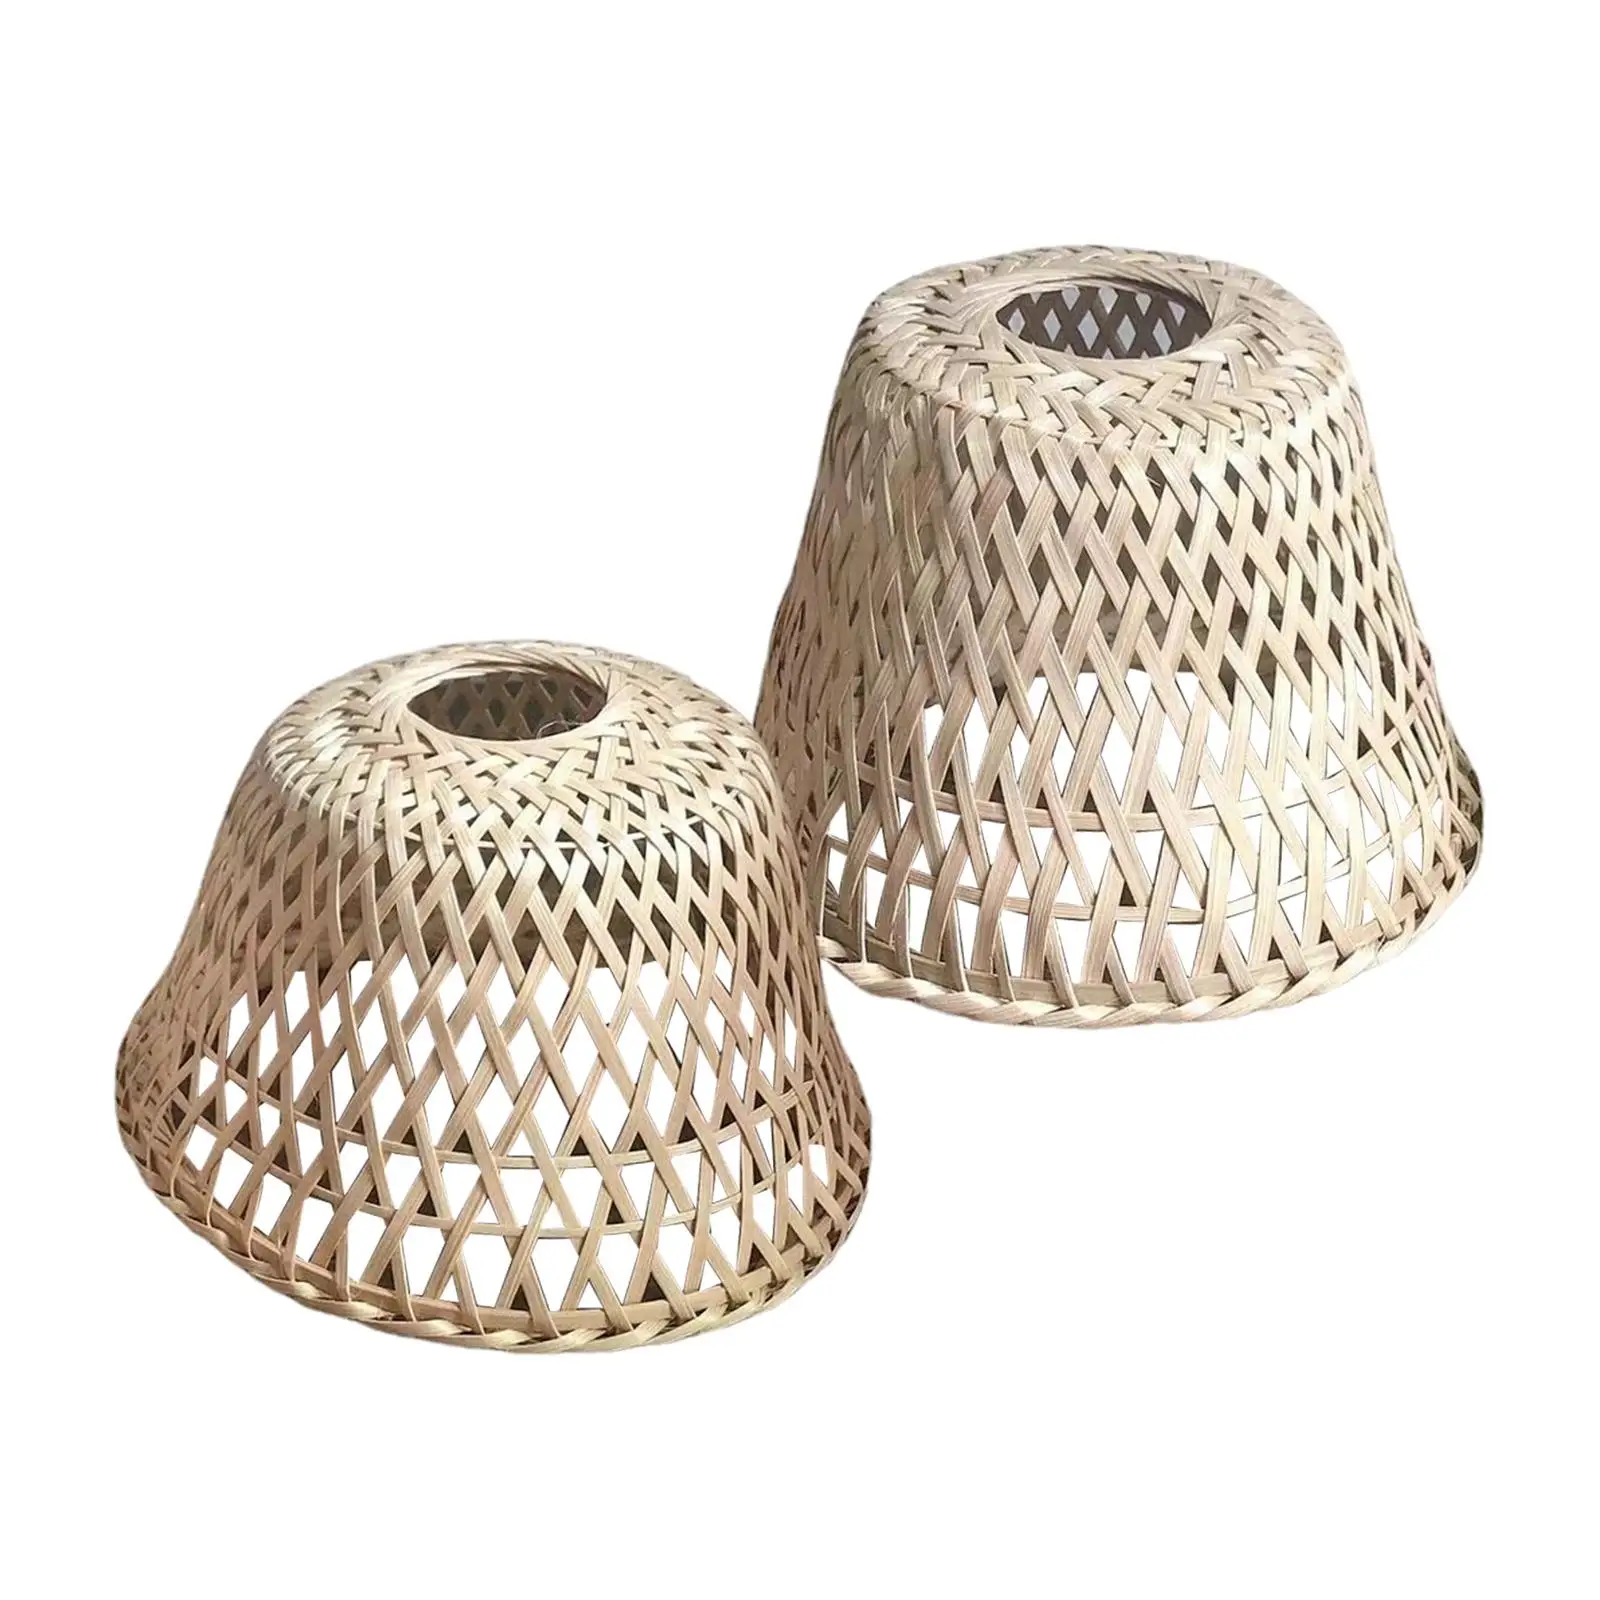 Woven Bamboo Pendant Light Shade for Living Room Rustic Premium Material